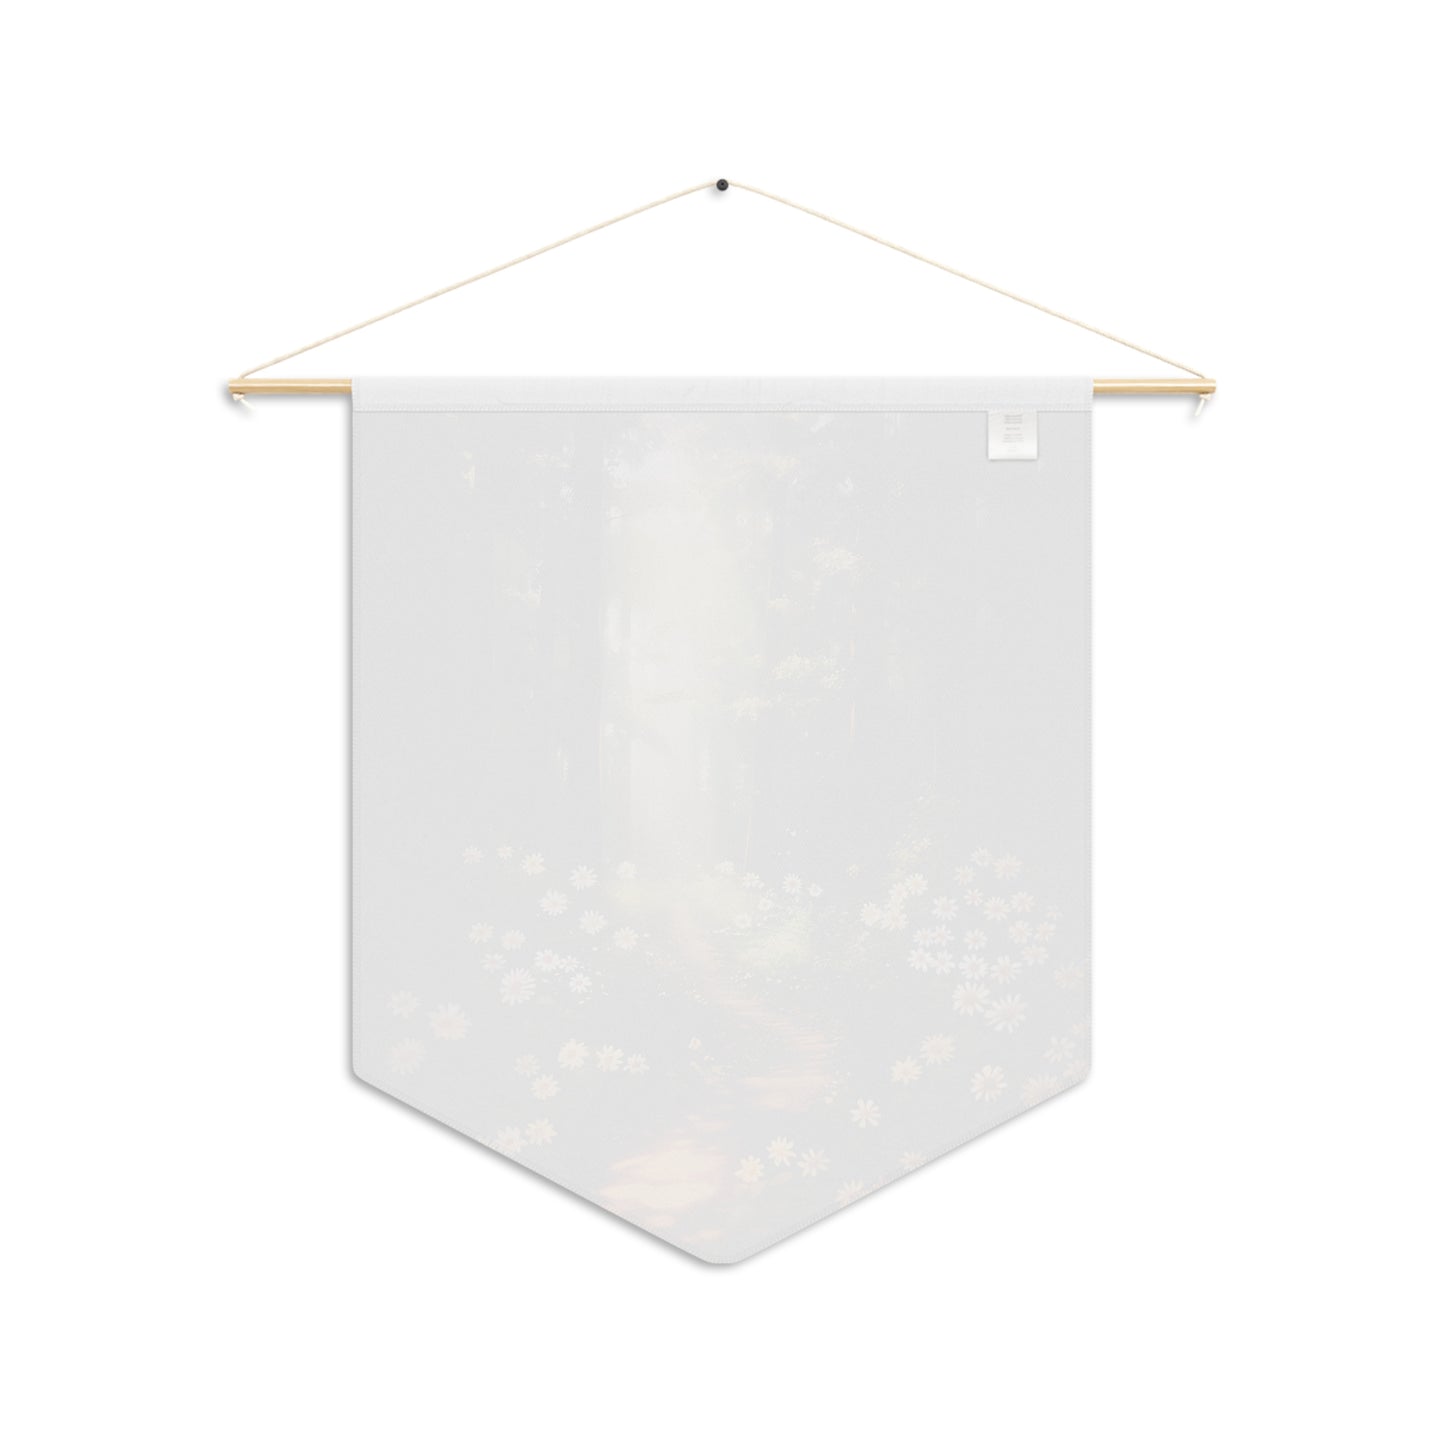 Illuminated Trail of Tranquility | Hanging Pennant